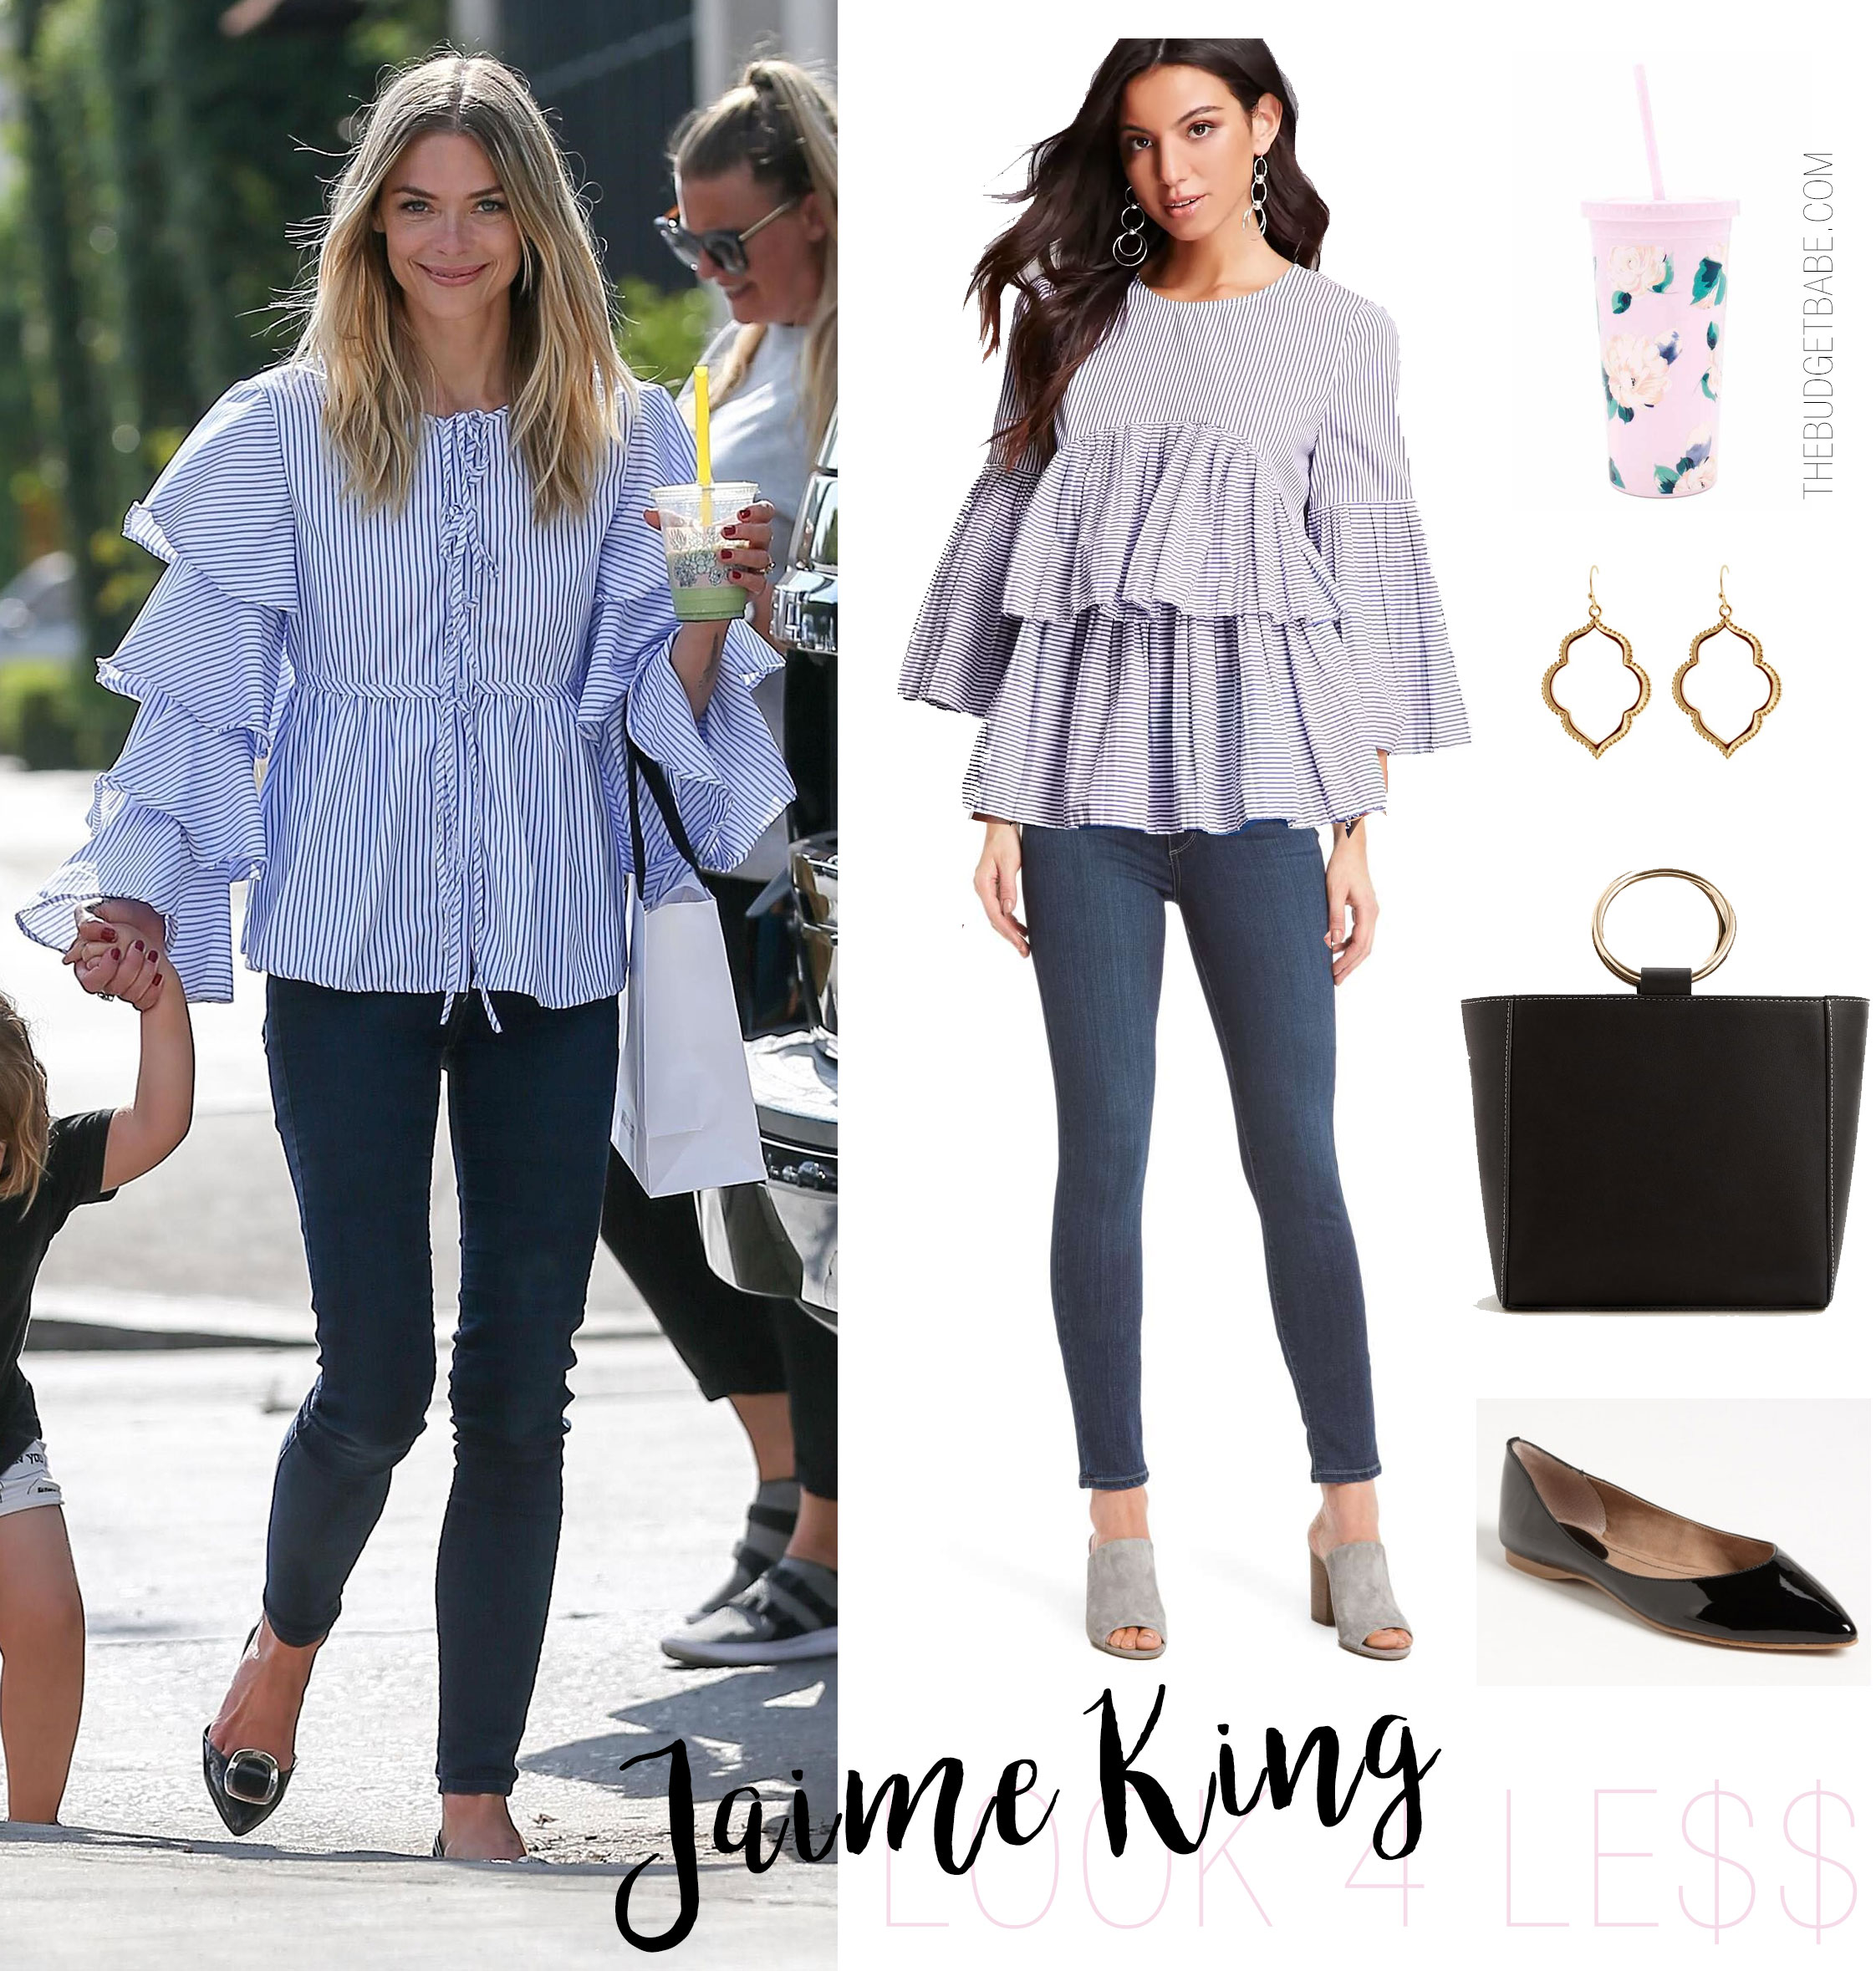 Jaime King wears a ruffle shirt and skinny jeans while shopping.